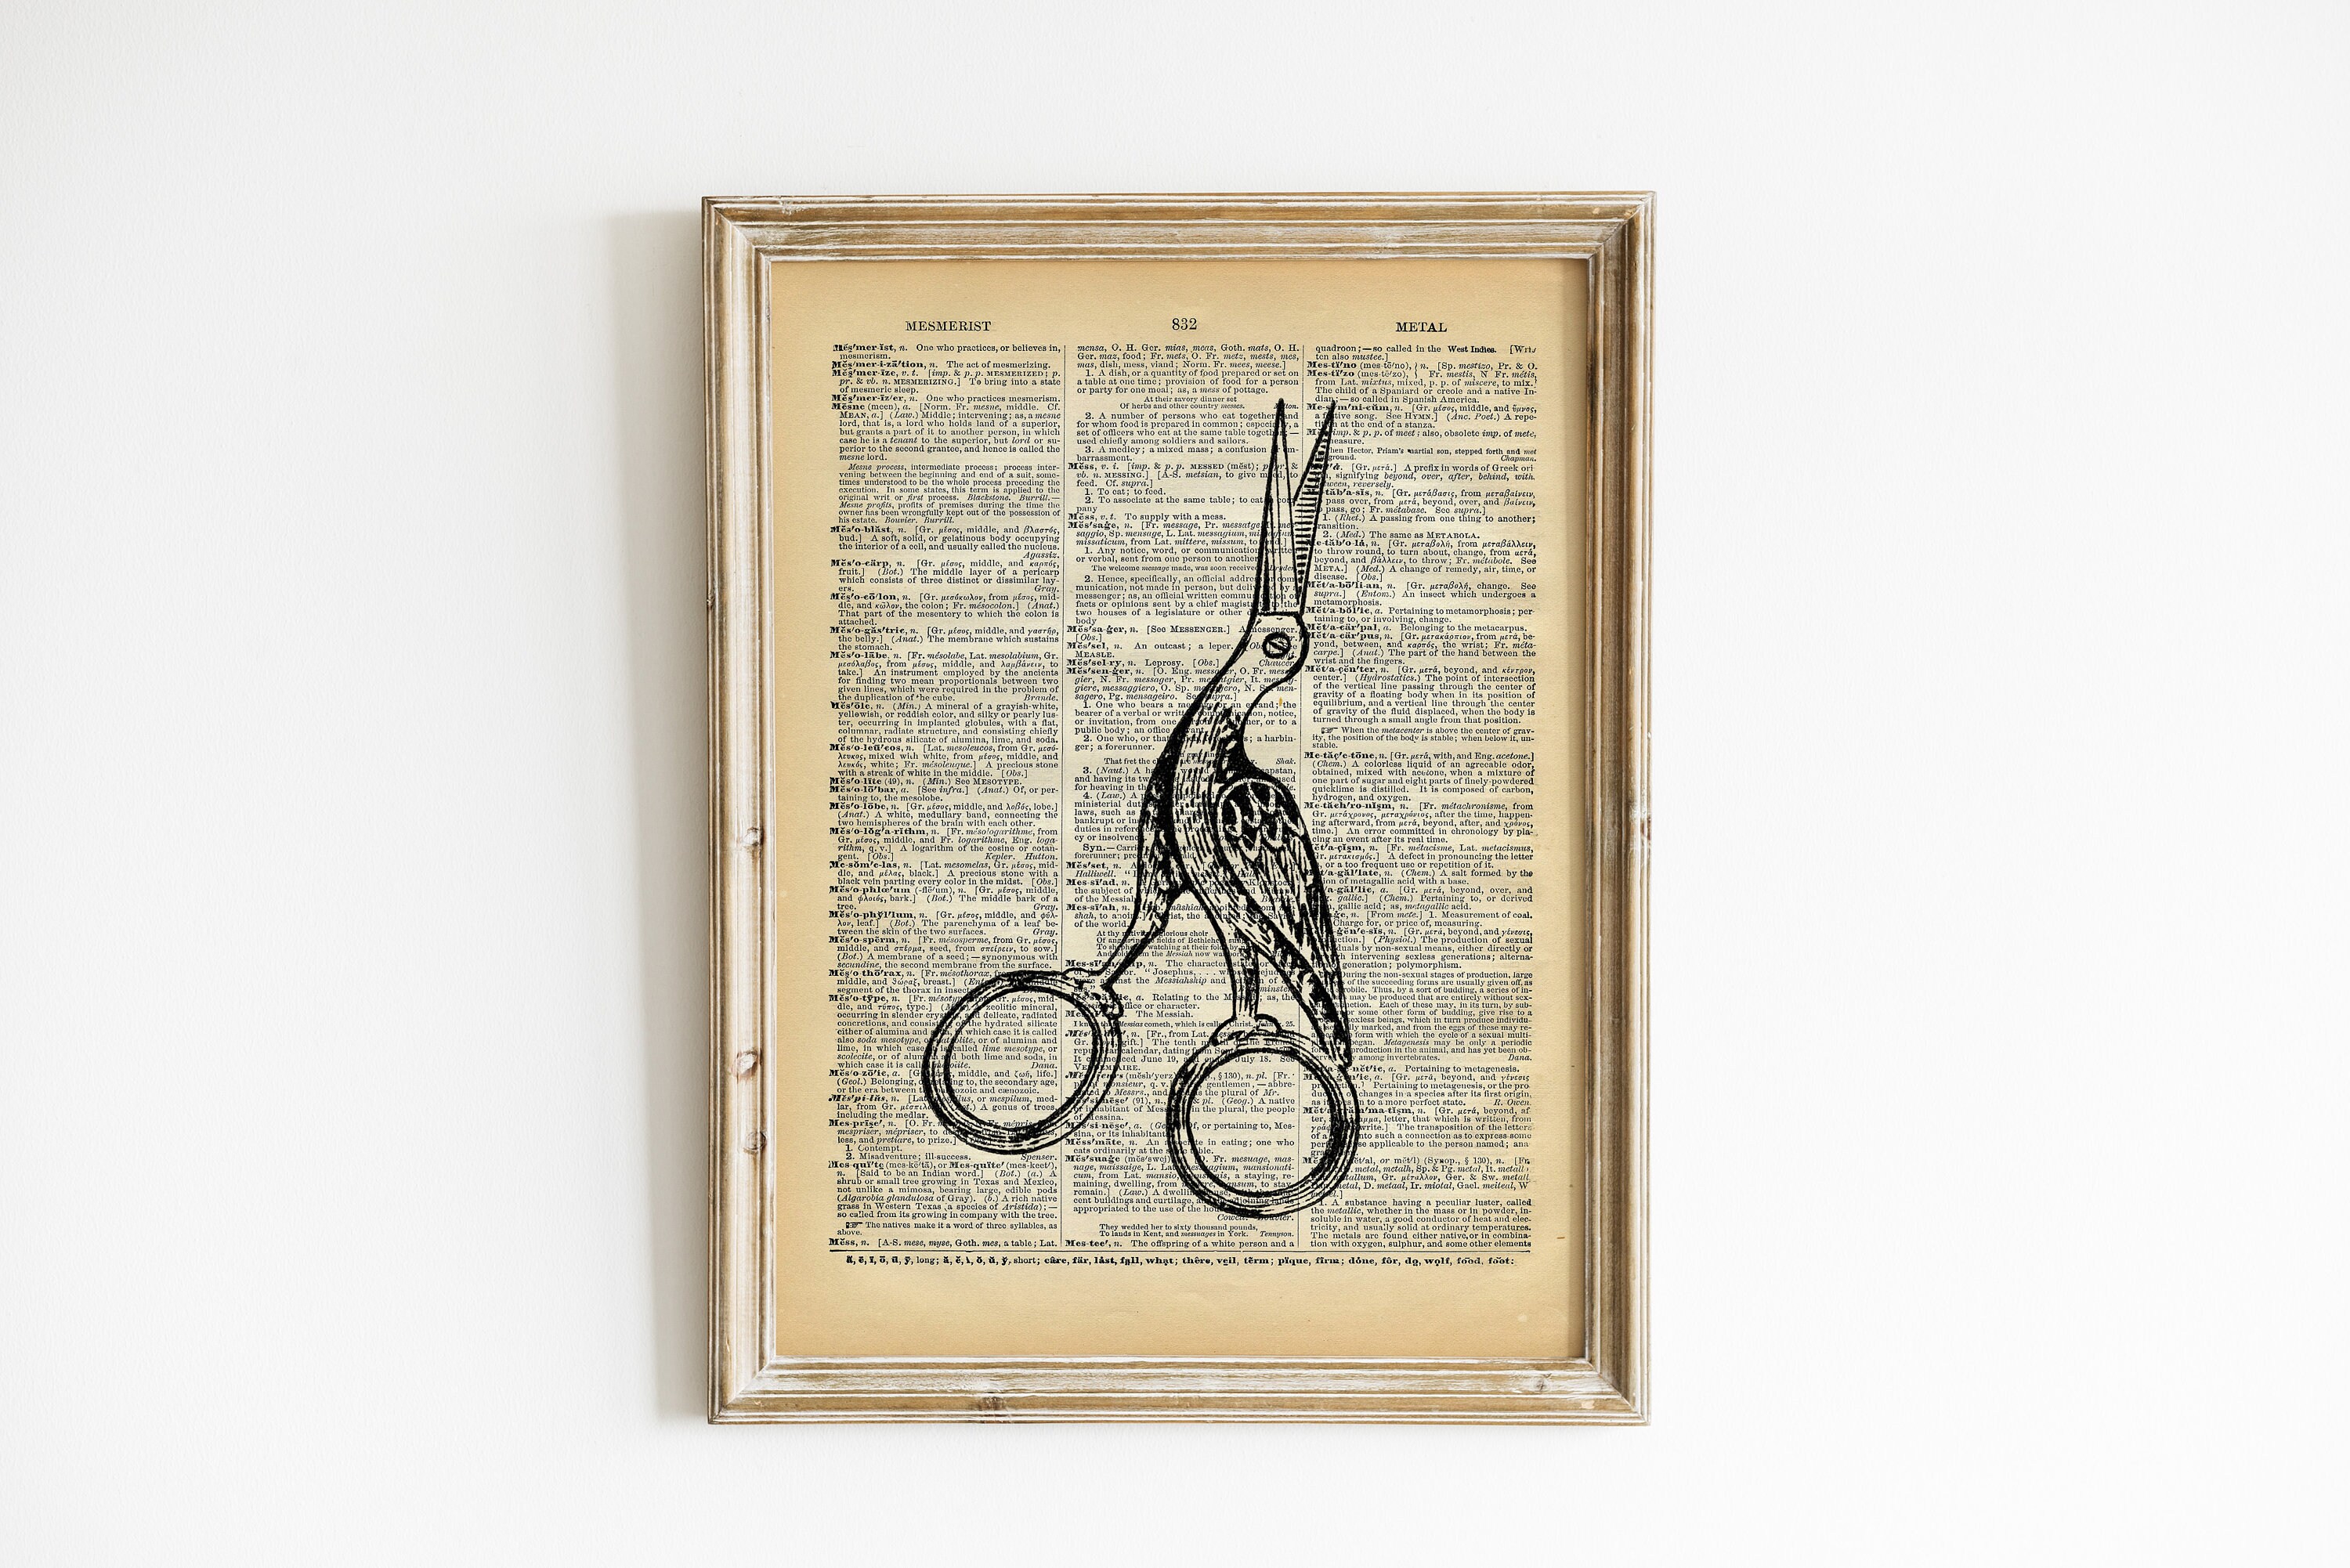 antique sewing scissors  Art Board Print for Sale by sandpiperstudio